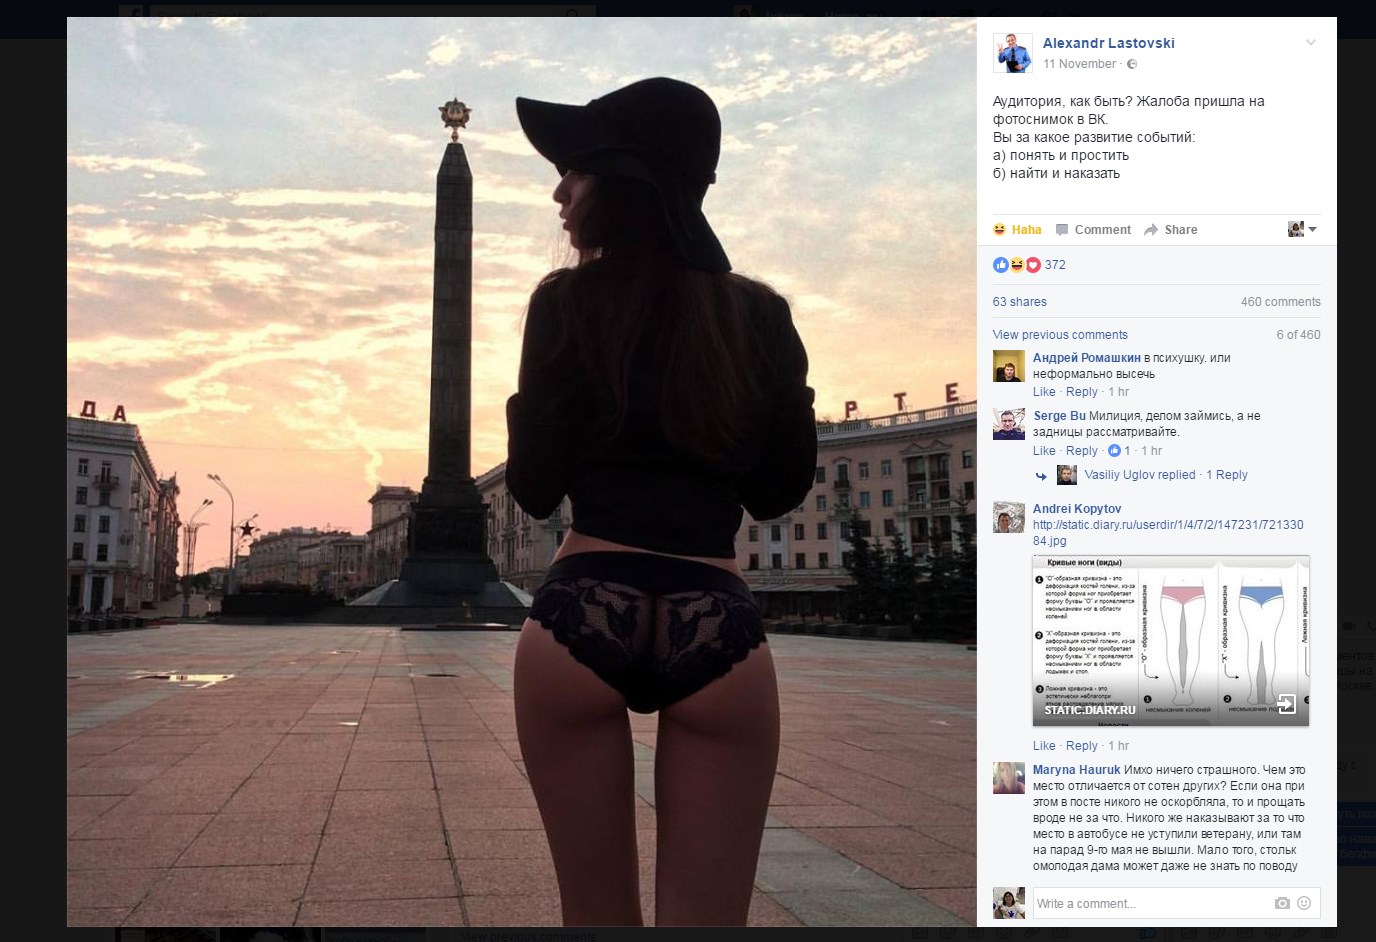 Panties Intruder! Minsk police ask public to help decide on punishment for half-naked photo